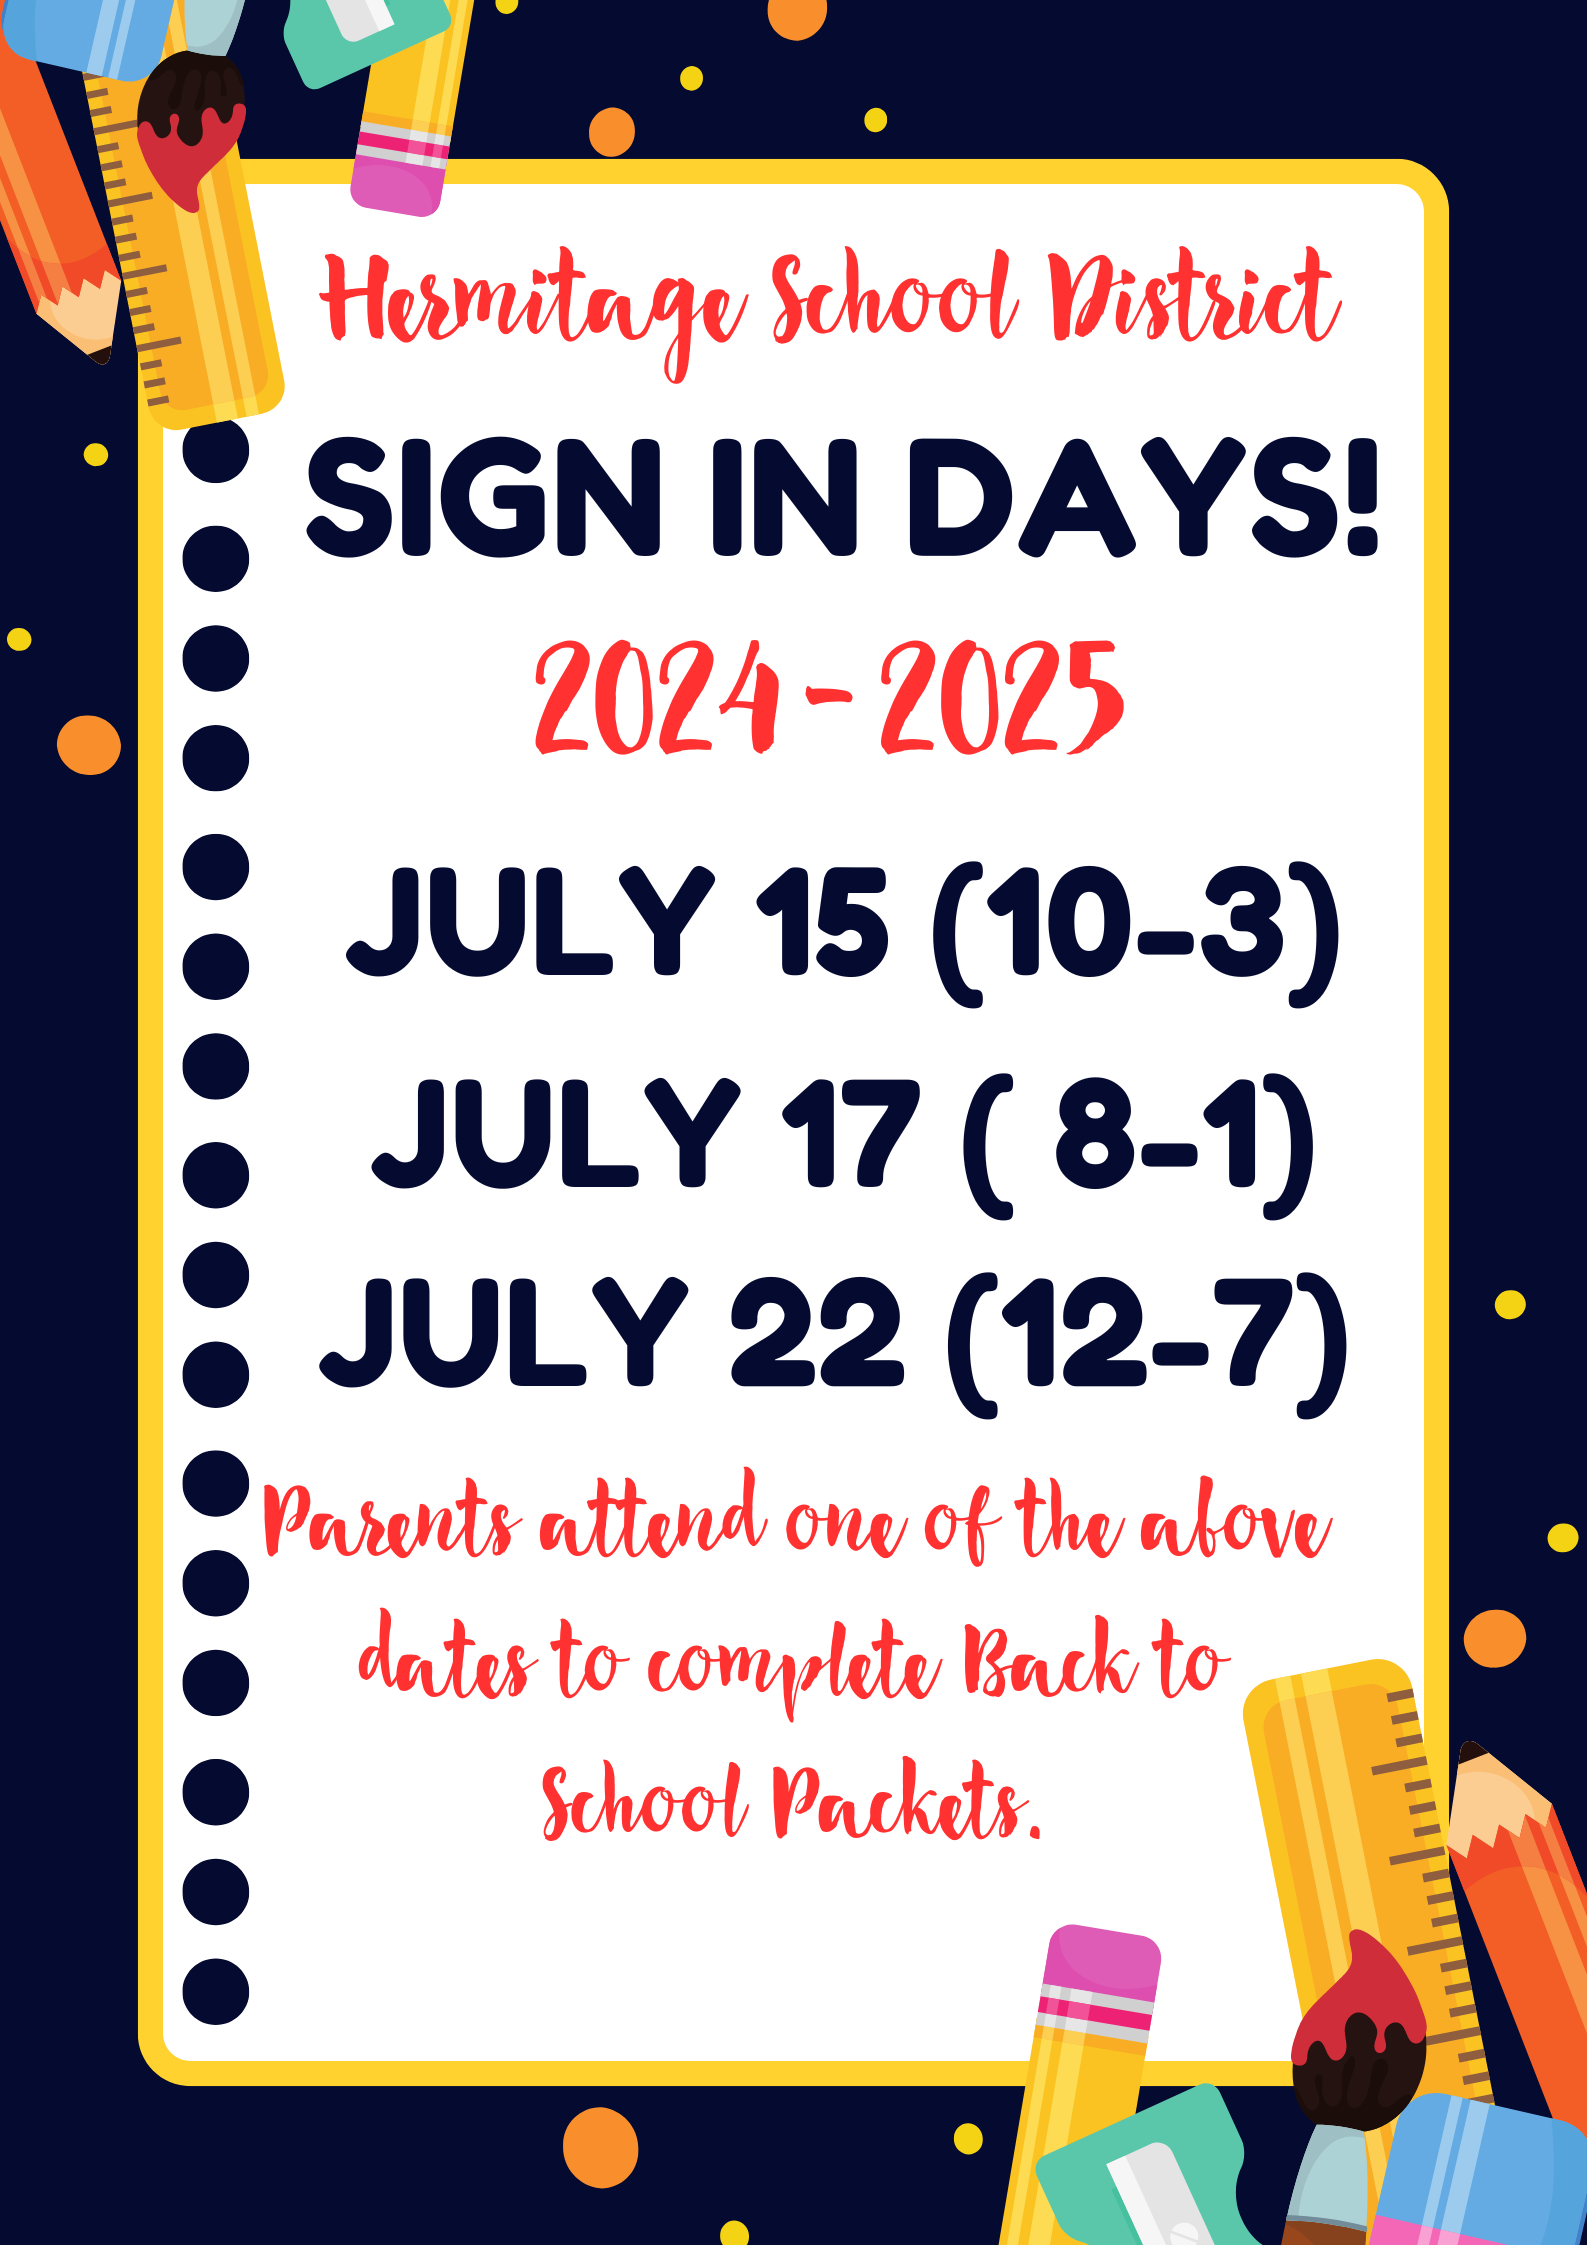 Sign in Days 2024-2025